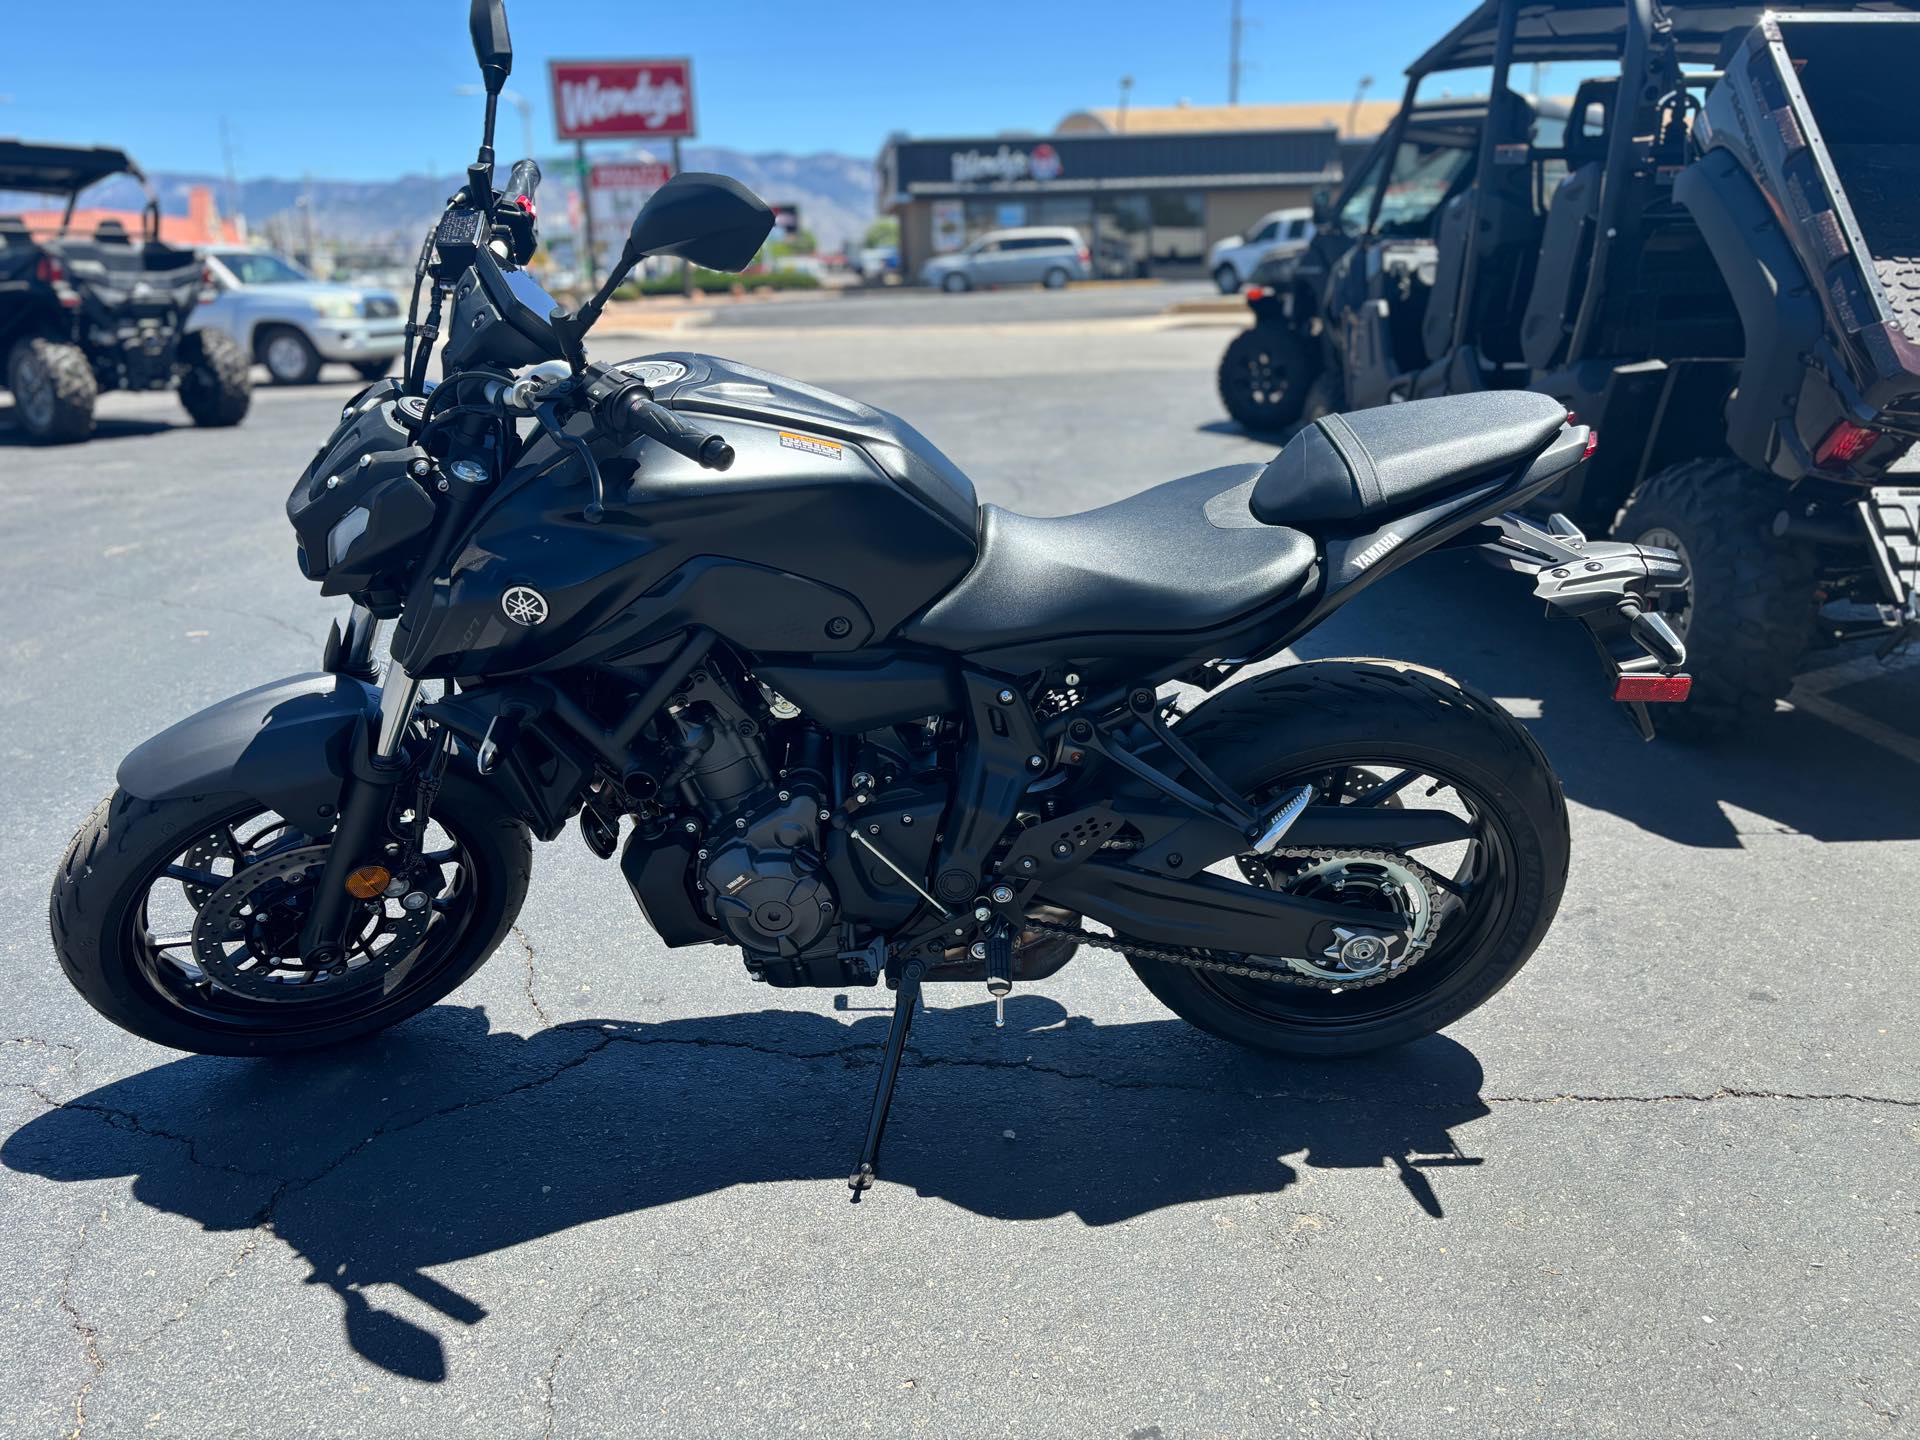 Our Yamaha MT Inventory